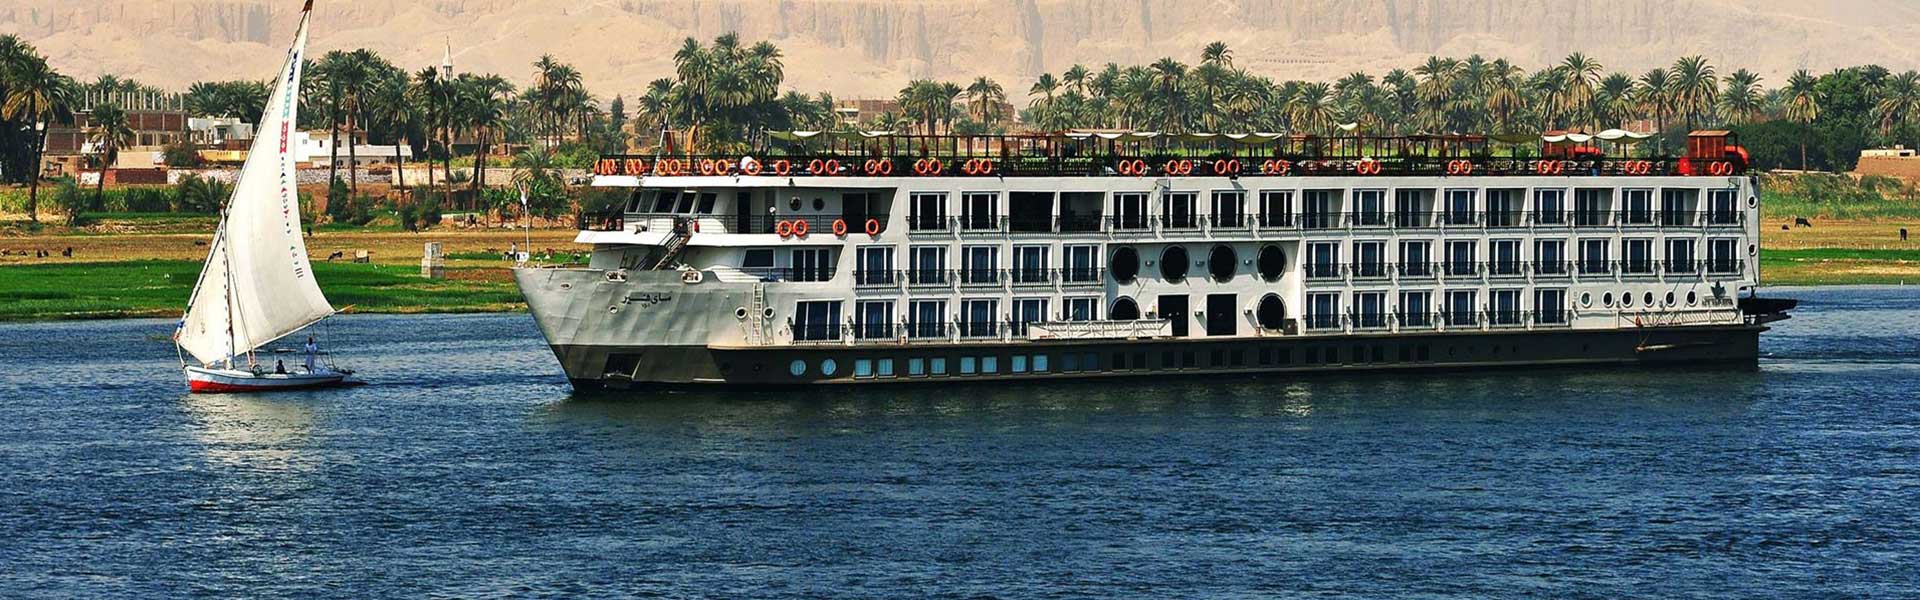 MS MayFair Nile Cruise 5 Days From Luxor